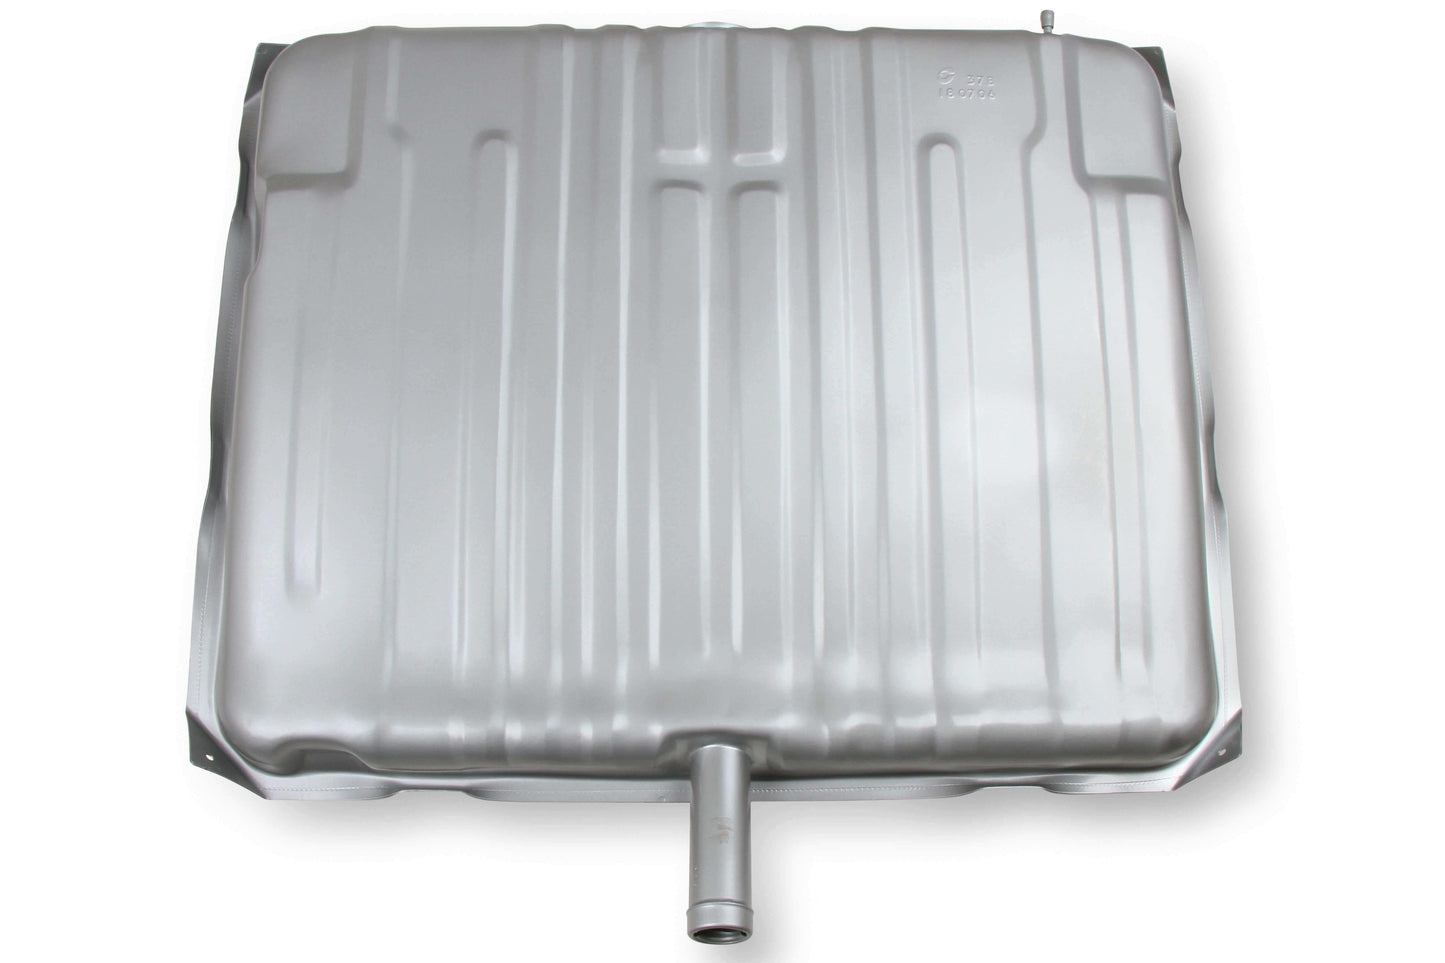 Stock Replacement Fuel Tank - 19-505